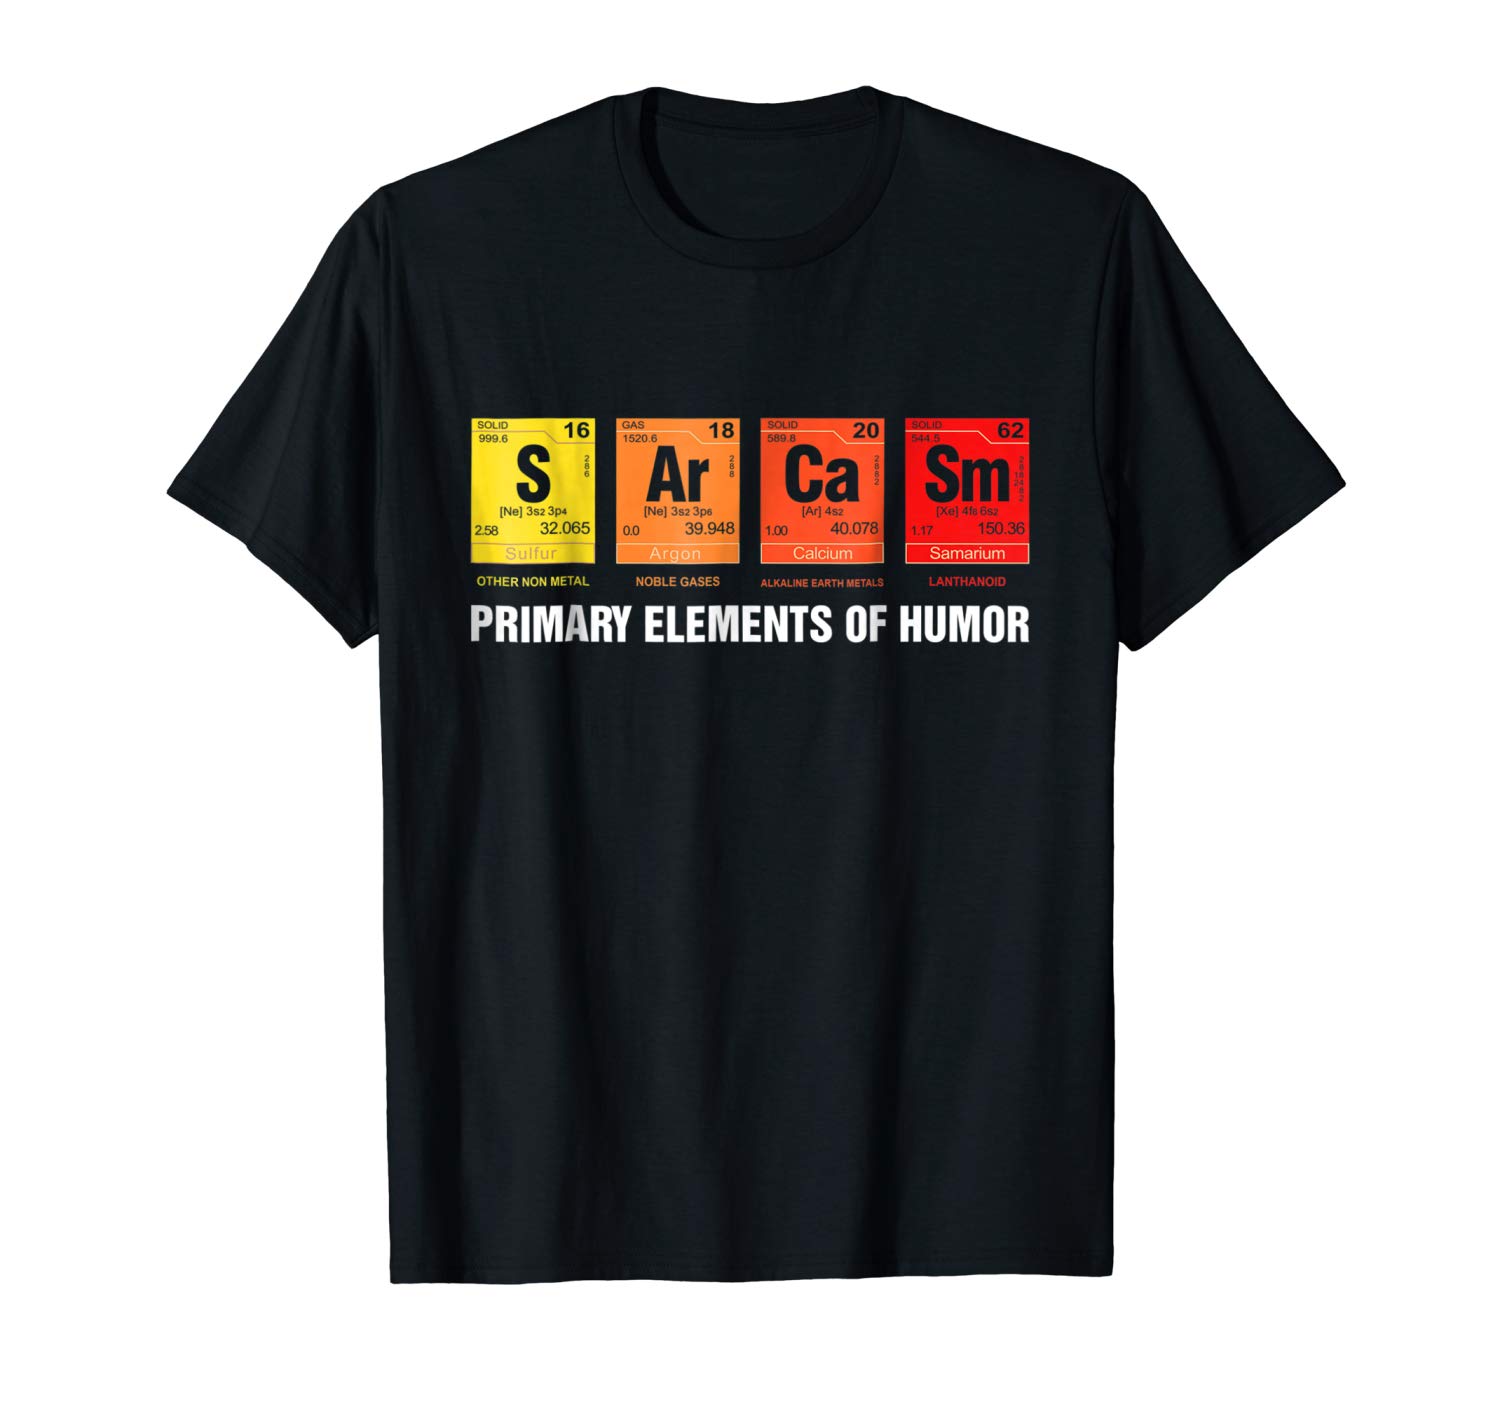 SArCaSm Primary Elements Of Humor Funny T-Shirt | T-Shirt Reviews